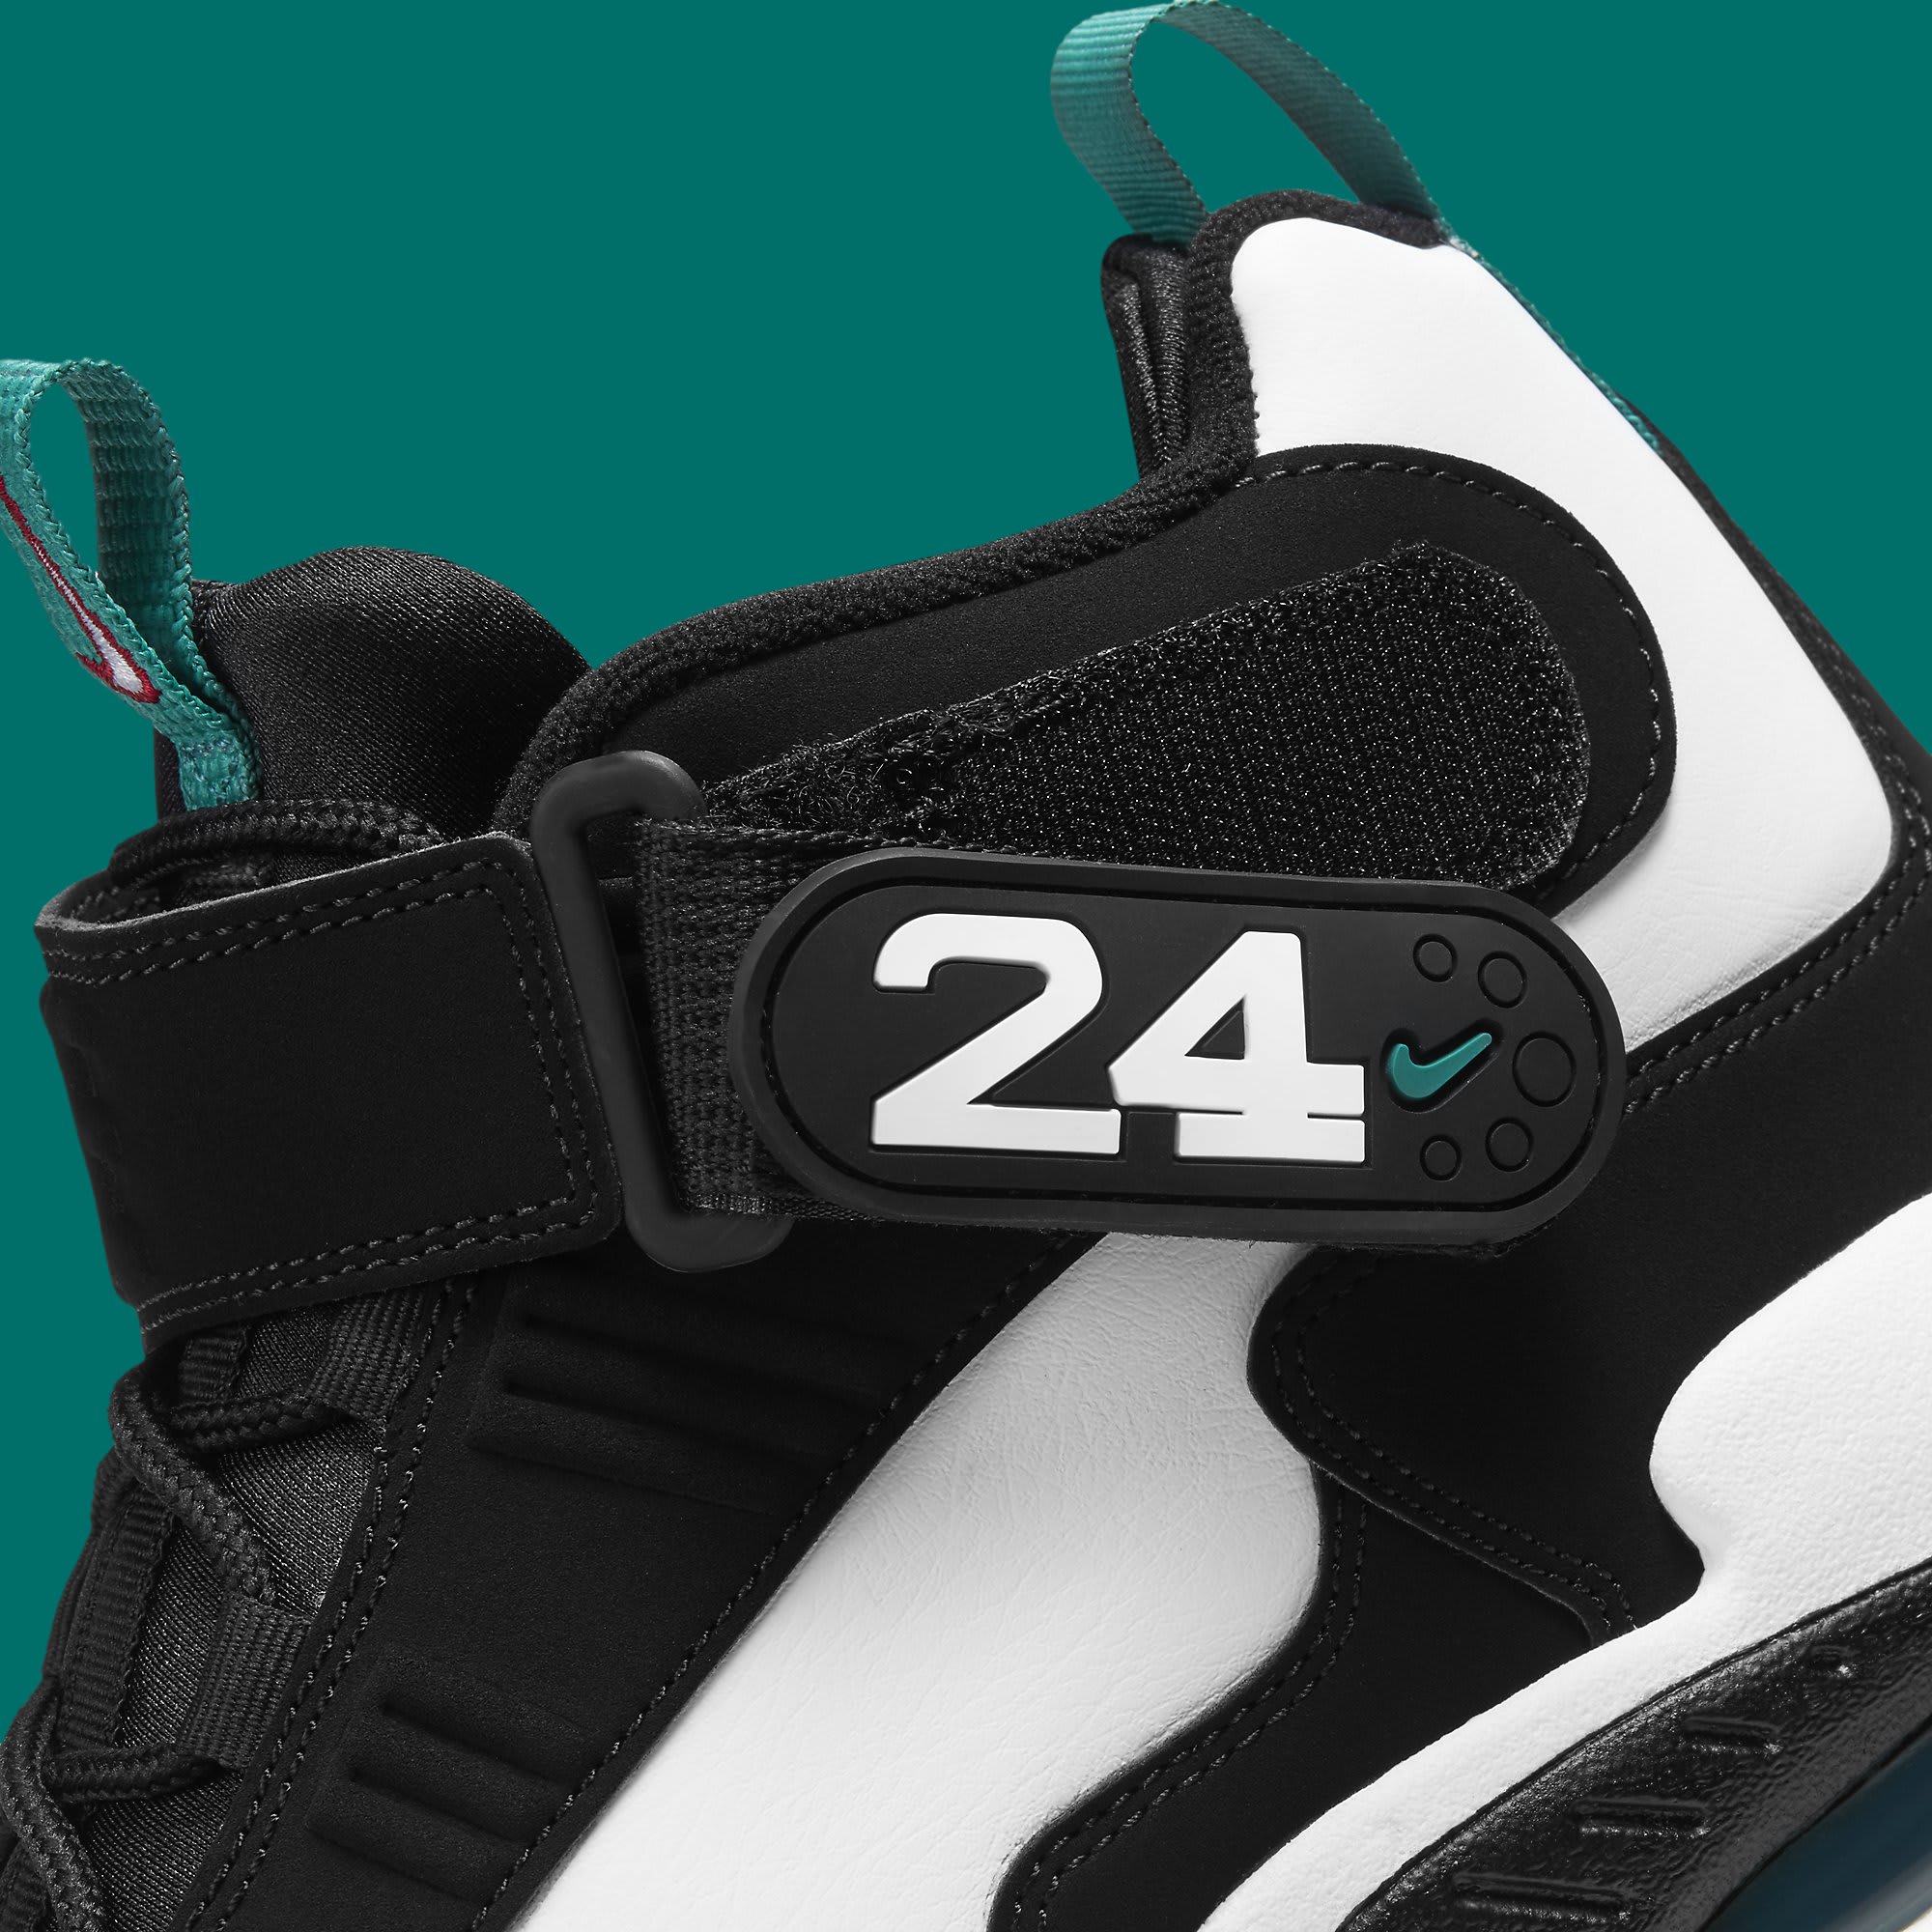 Detailed Look at the 2021 Nike Air Griffey Max 1 Retro